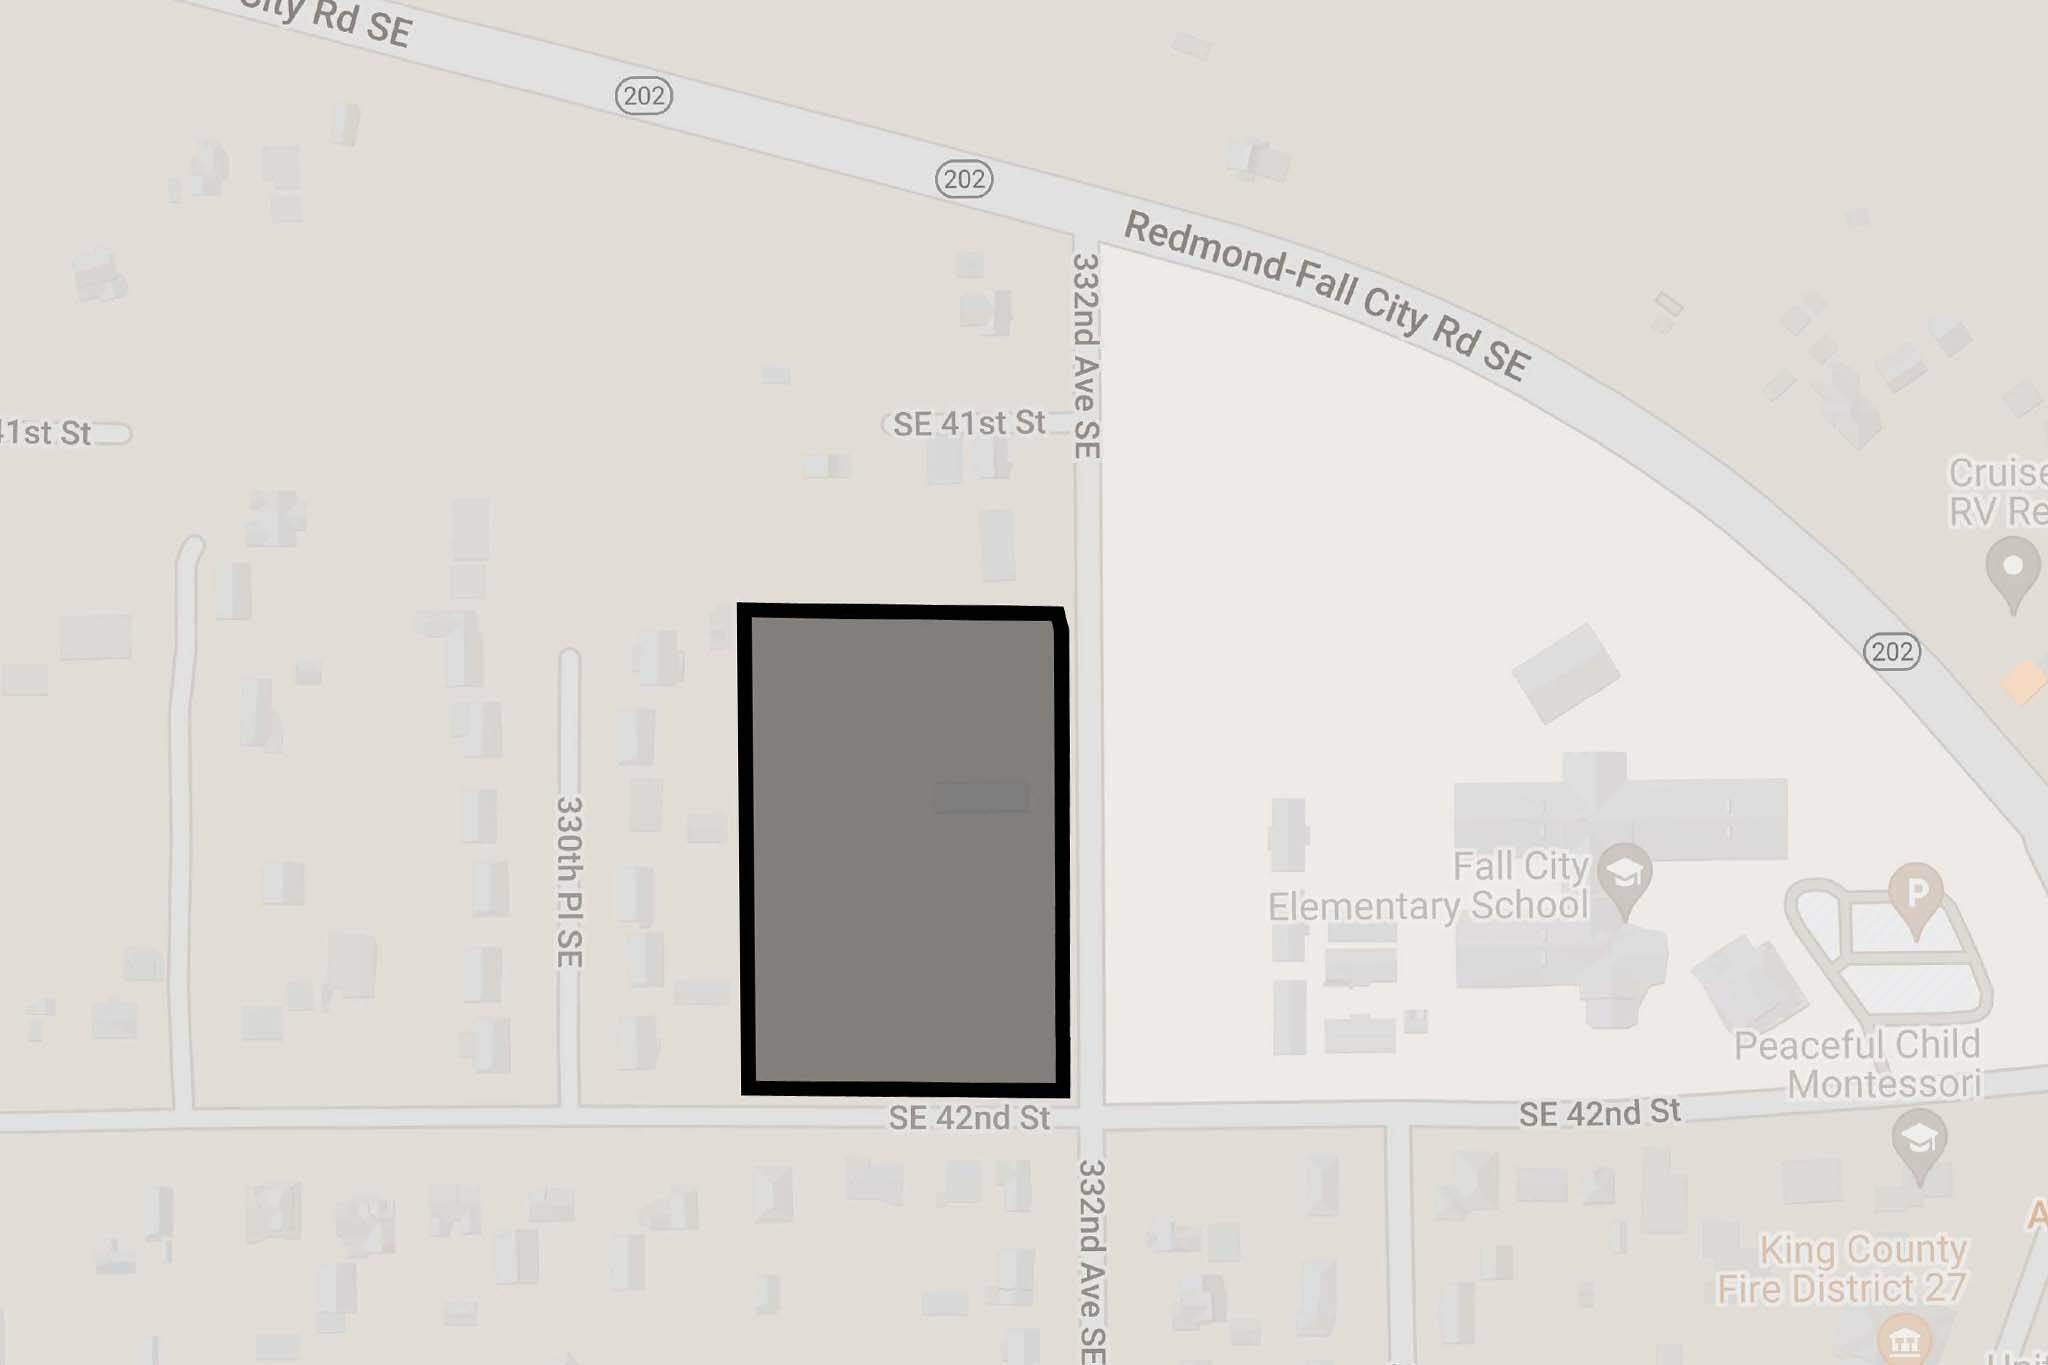 A map showing the location of 13 planned single-family homes in Fall City.